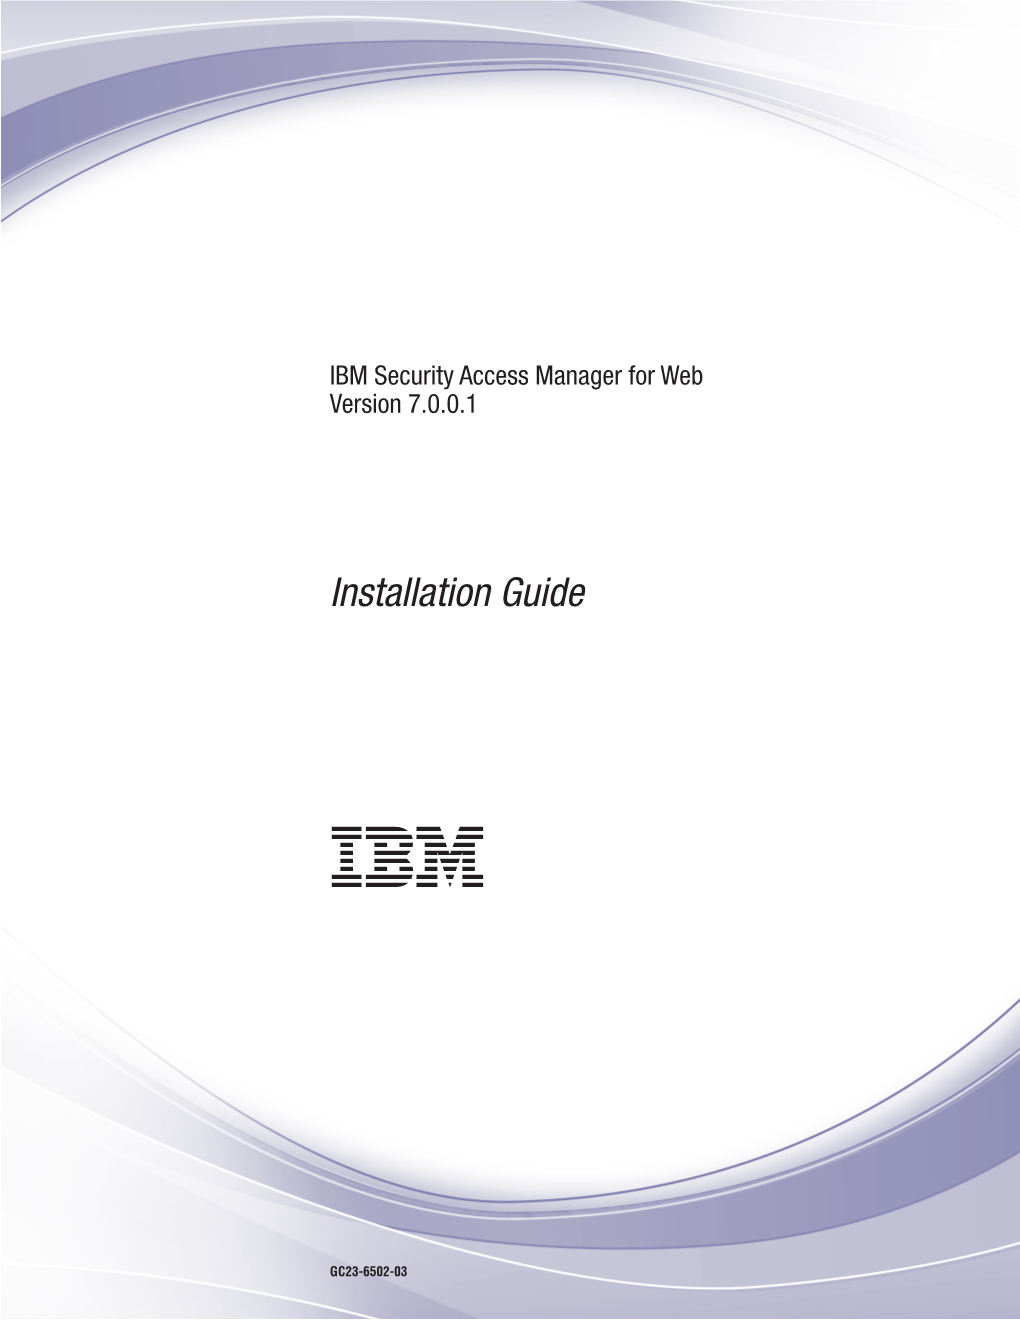 IBM Security Access Manager for Web Version 7.0.0.1: Installation Guide Setting up a Policy Proxy Server Using the Chapter 13